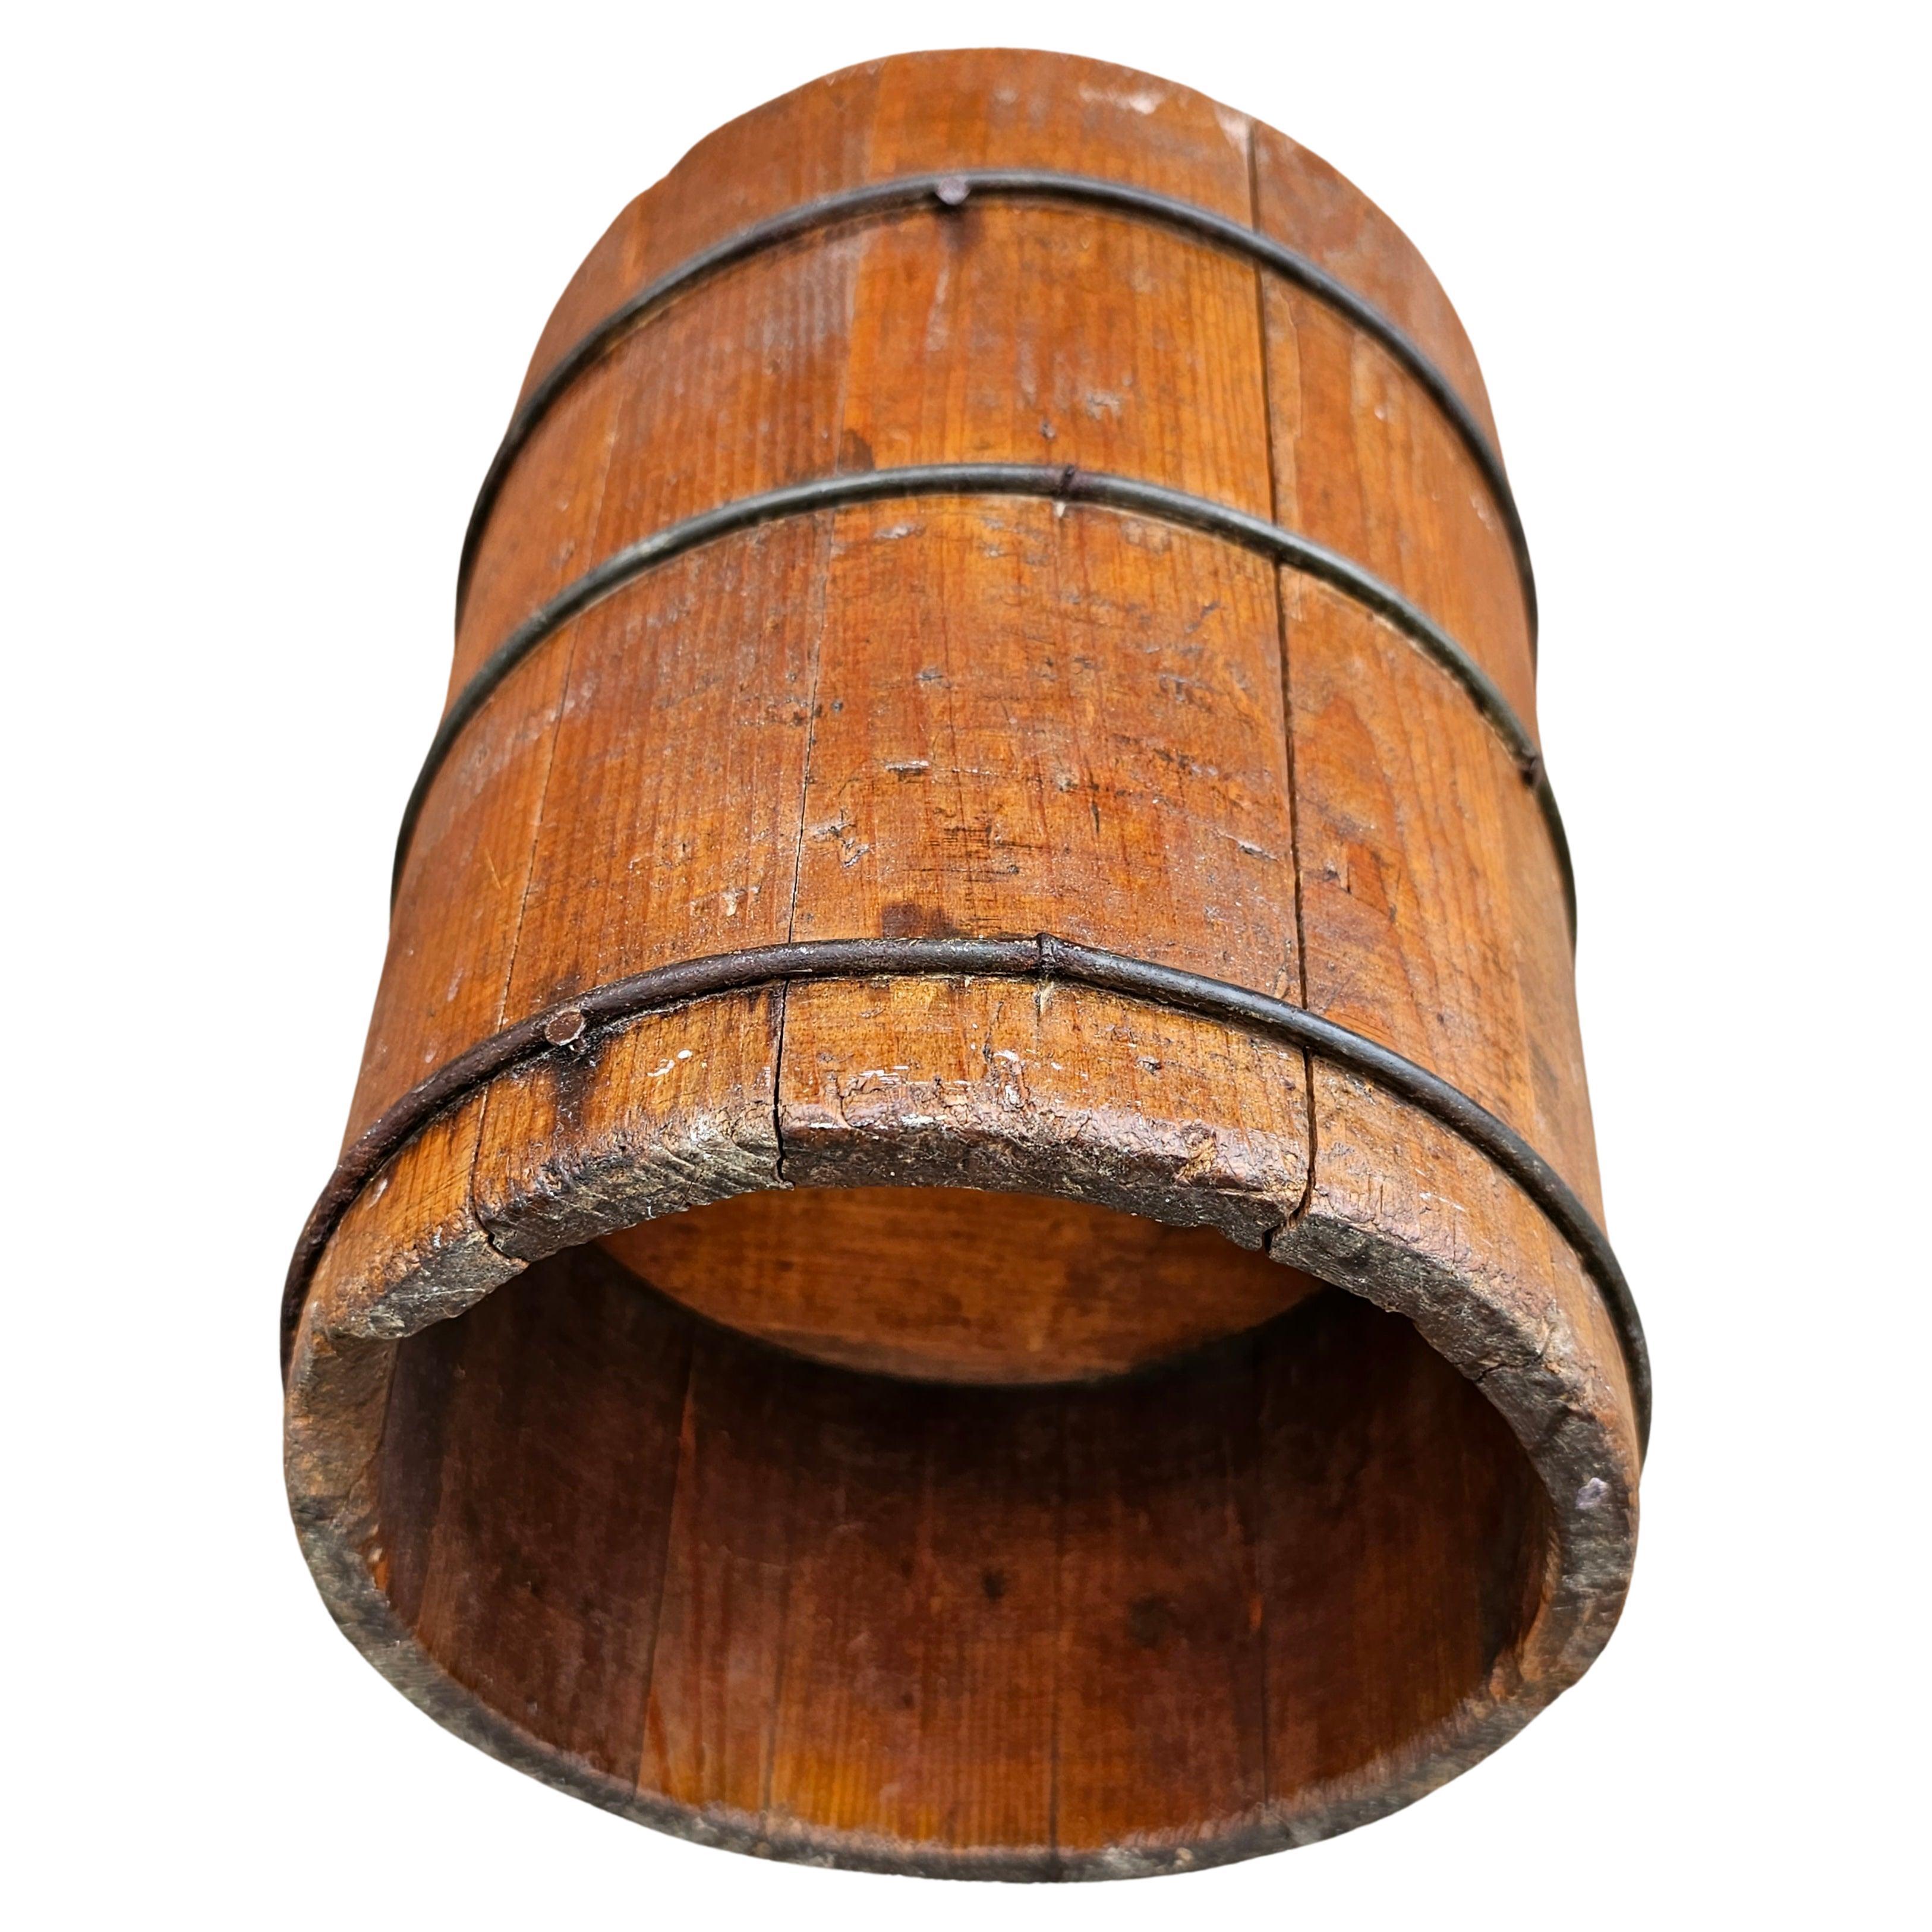 Edwardian 19th Century Handcrafted Turned Wooden Bail Bucket, Nowadays Planter For Sale